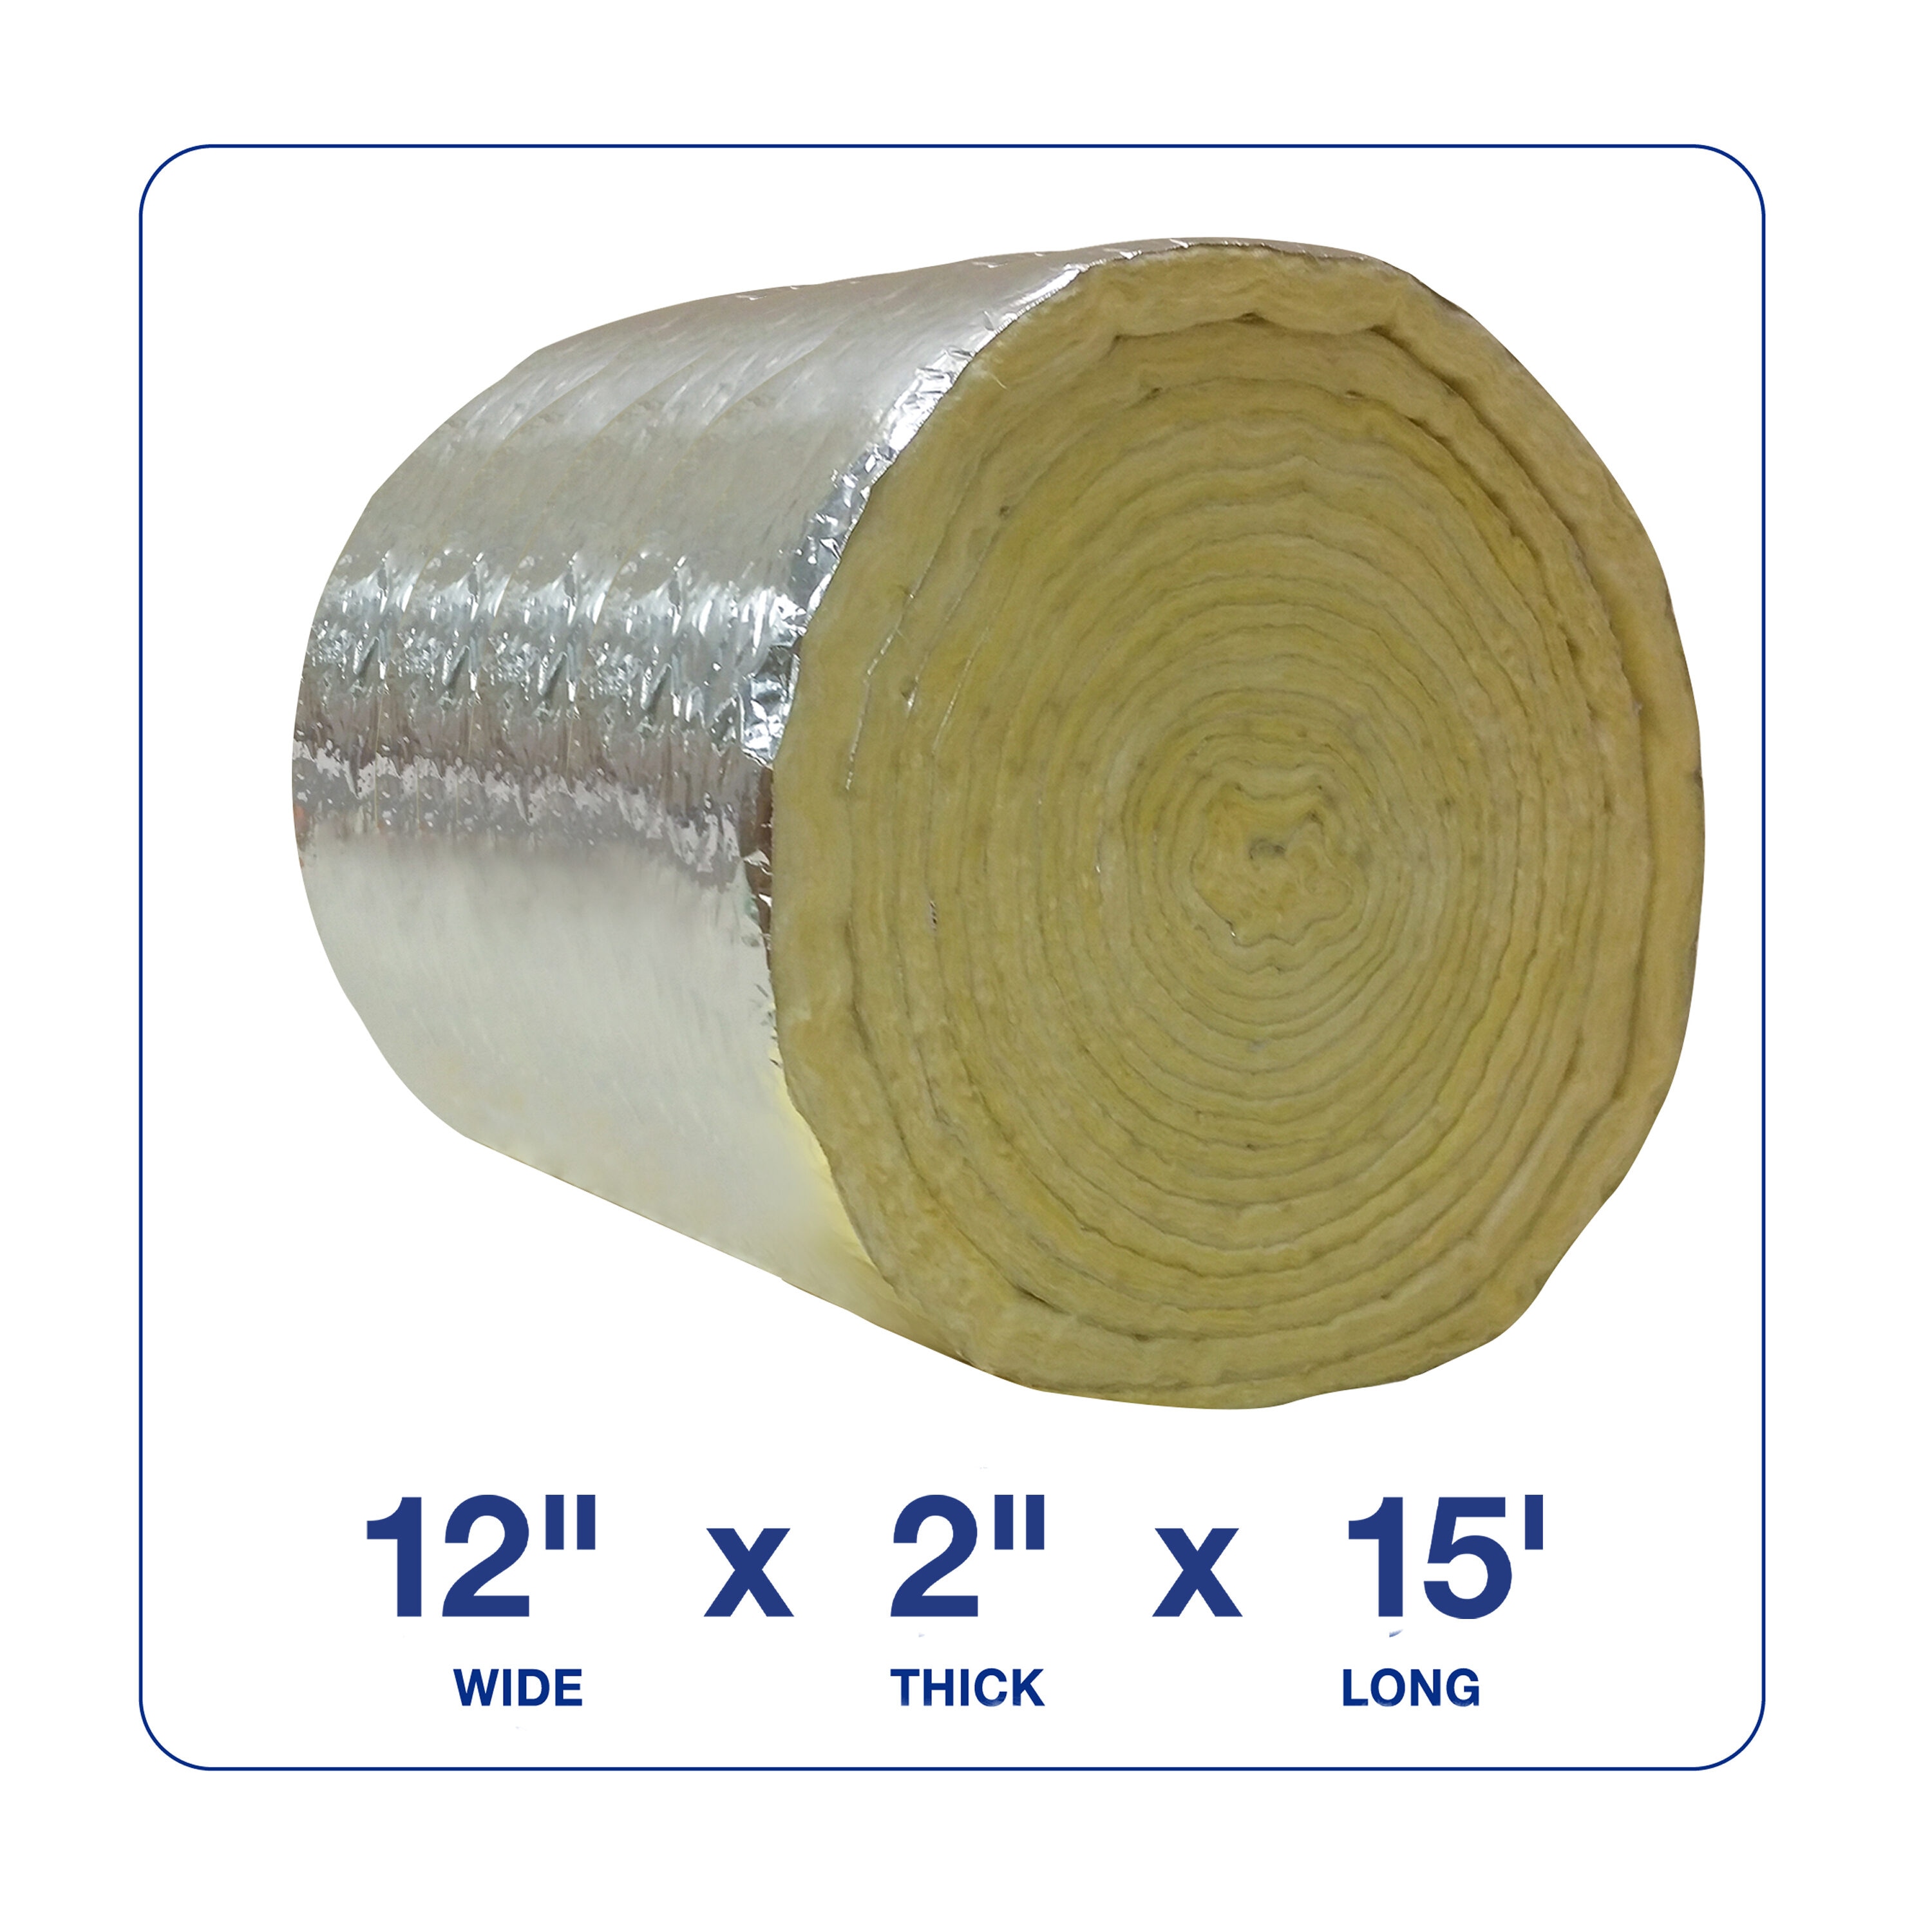 Reviews for Frost King Fiberglass Water Heater Insulation Blanket